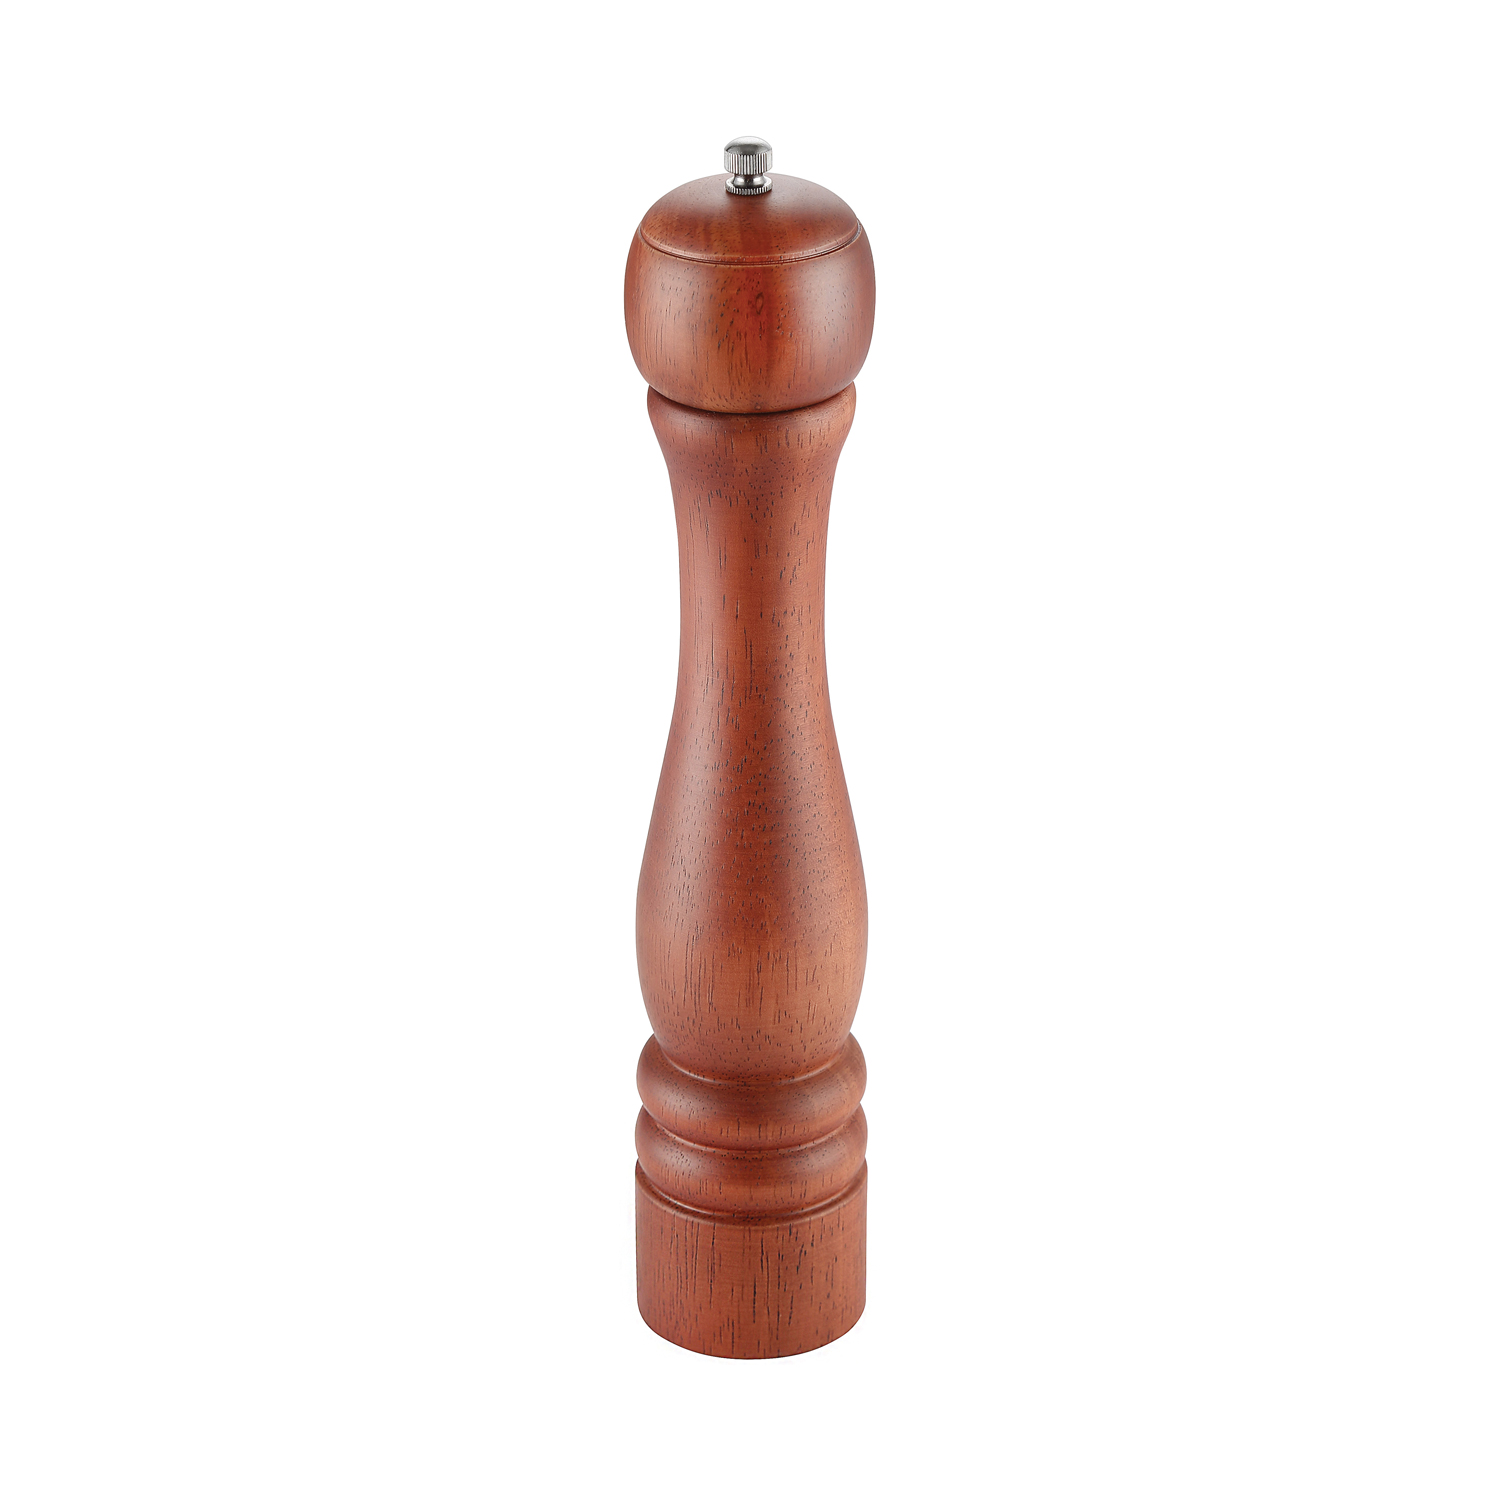 CAC China PMW1-12BN Pepper Mill Wooden Brown 12"H